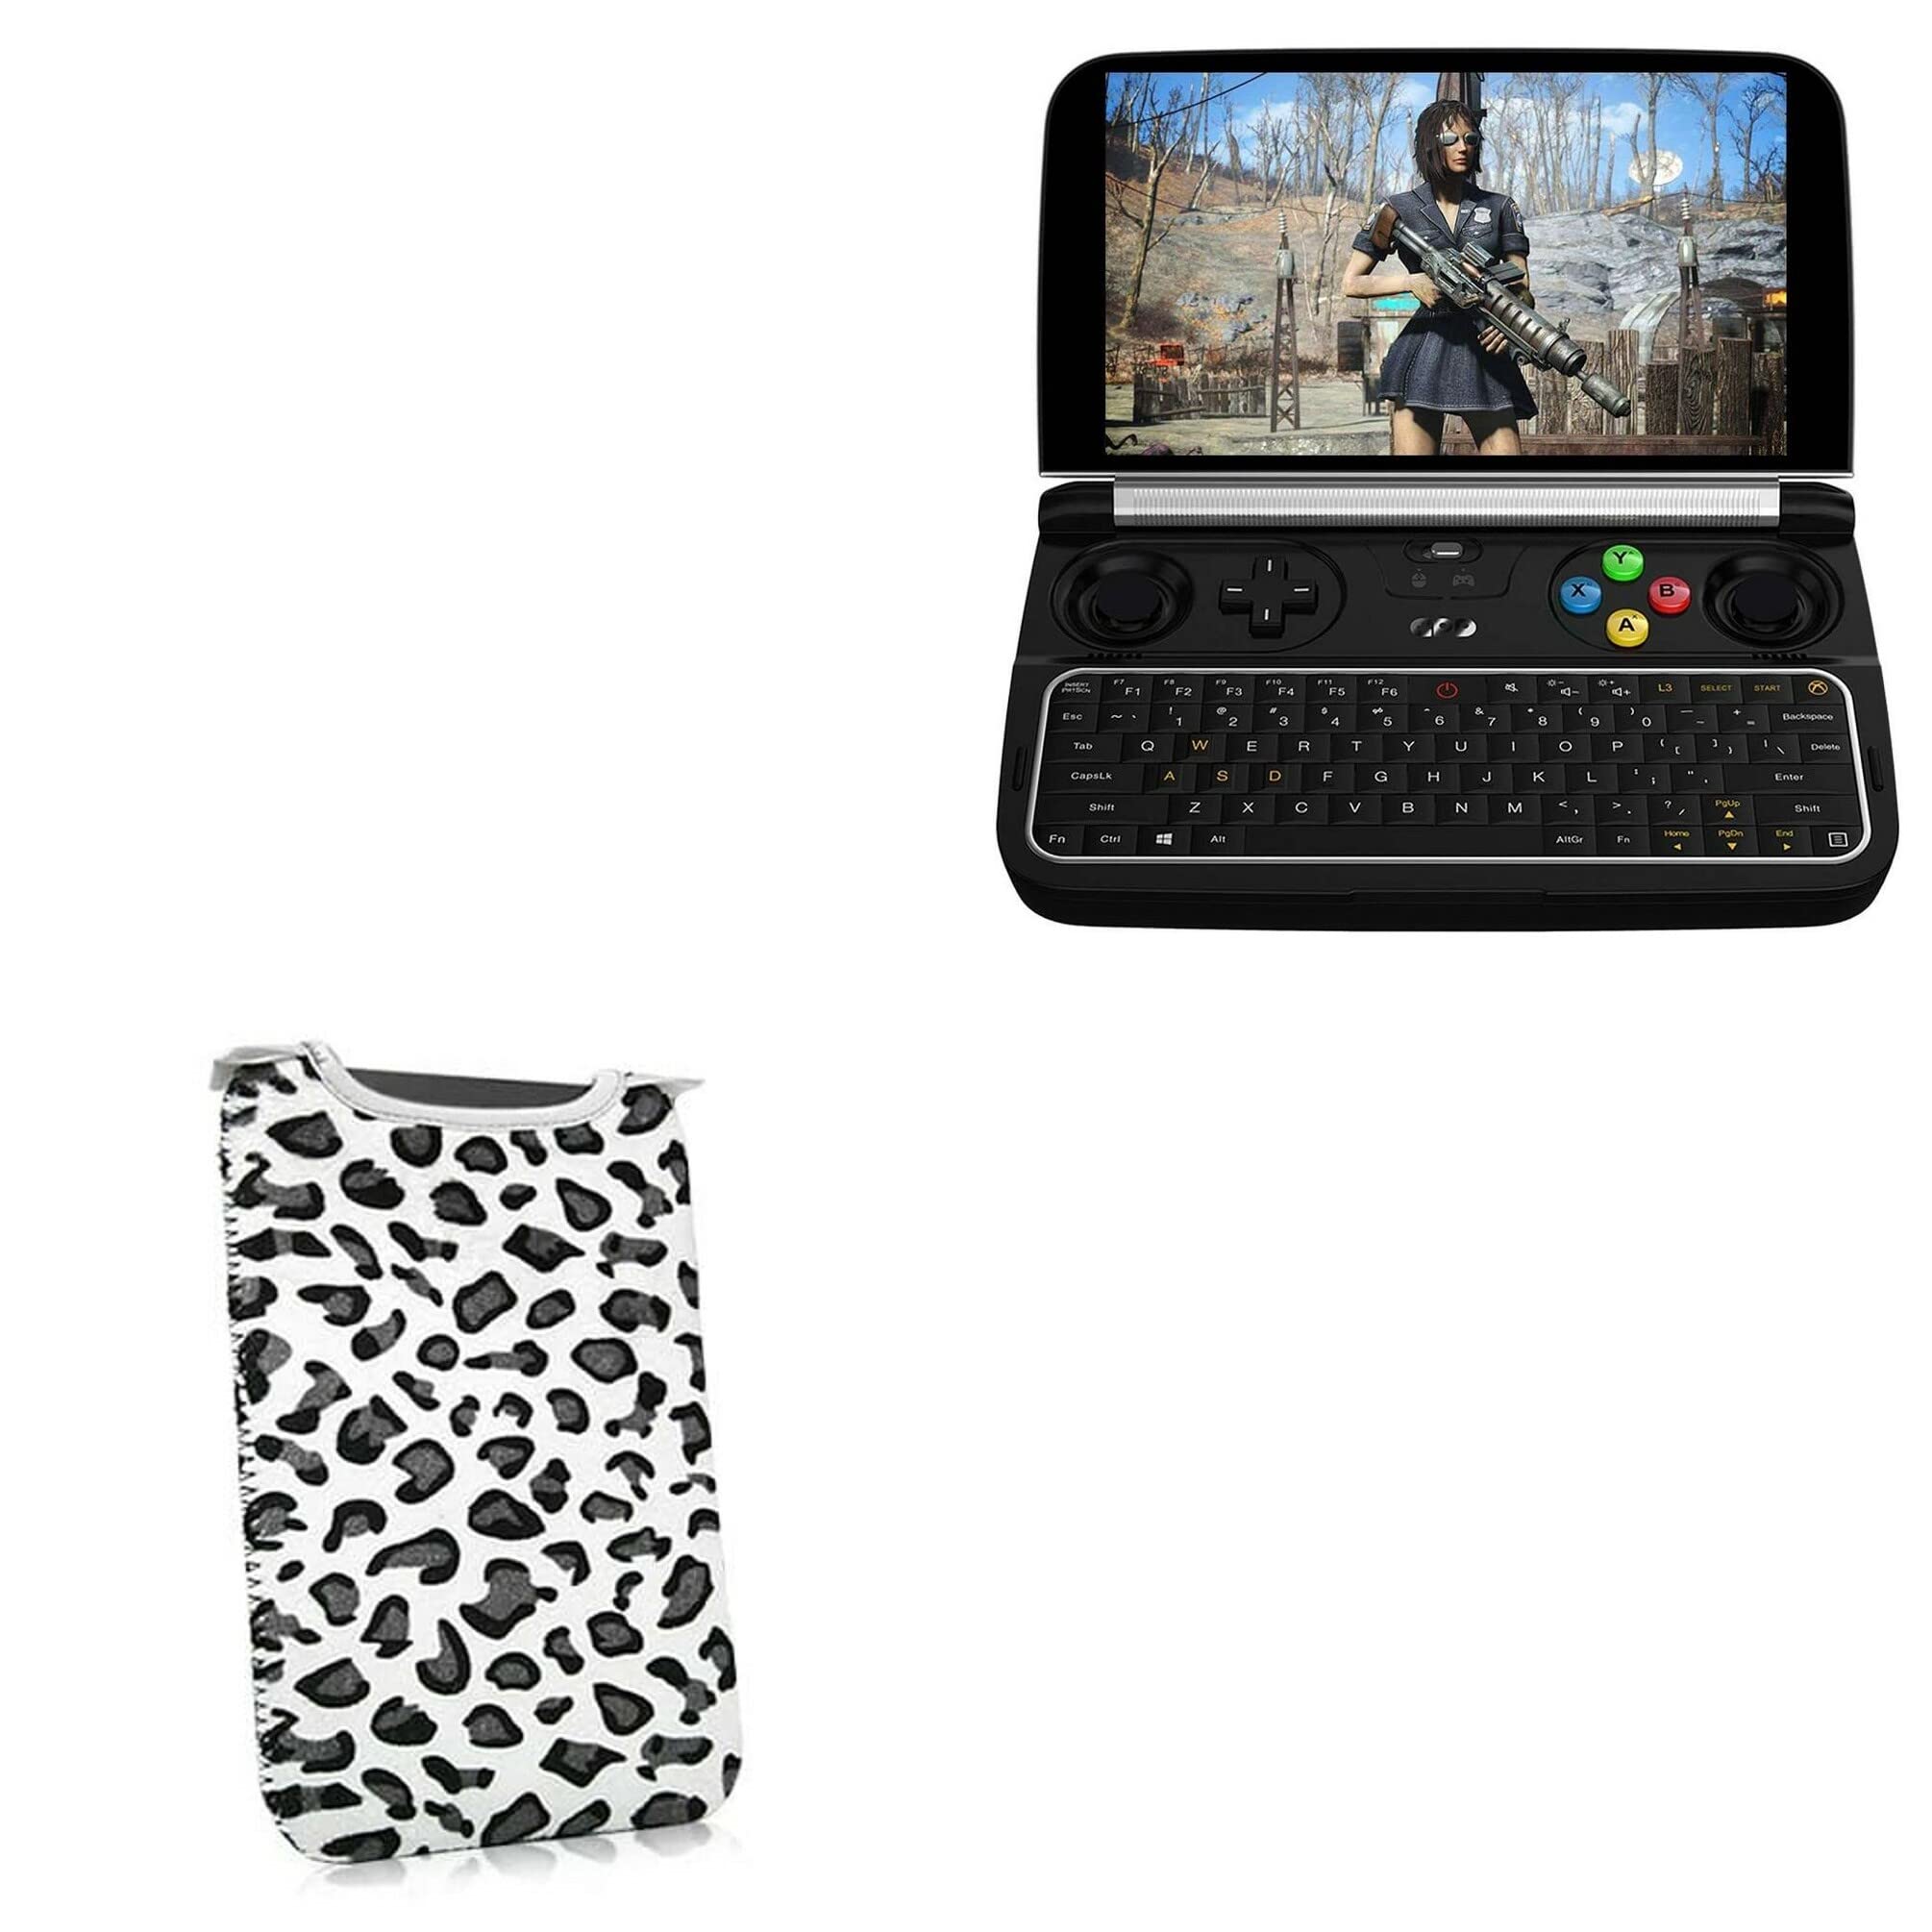 BoxWave Case for GPD Win 2 (Case by BoxWave) - Snow Leopard Plush SlipSuit, Animal Leopard Print Padded Soft Sleeve for GPD Win 2, GPD MicroPC | GPD Win 2 | XD Plus